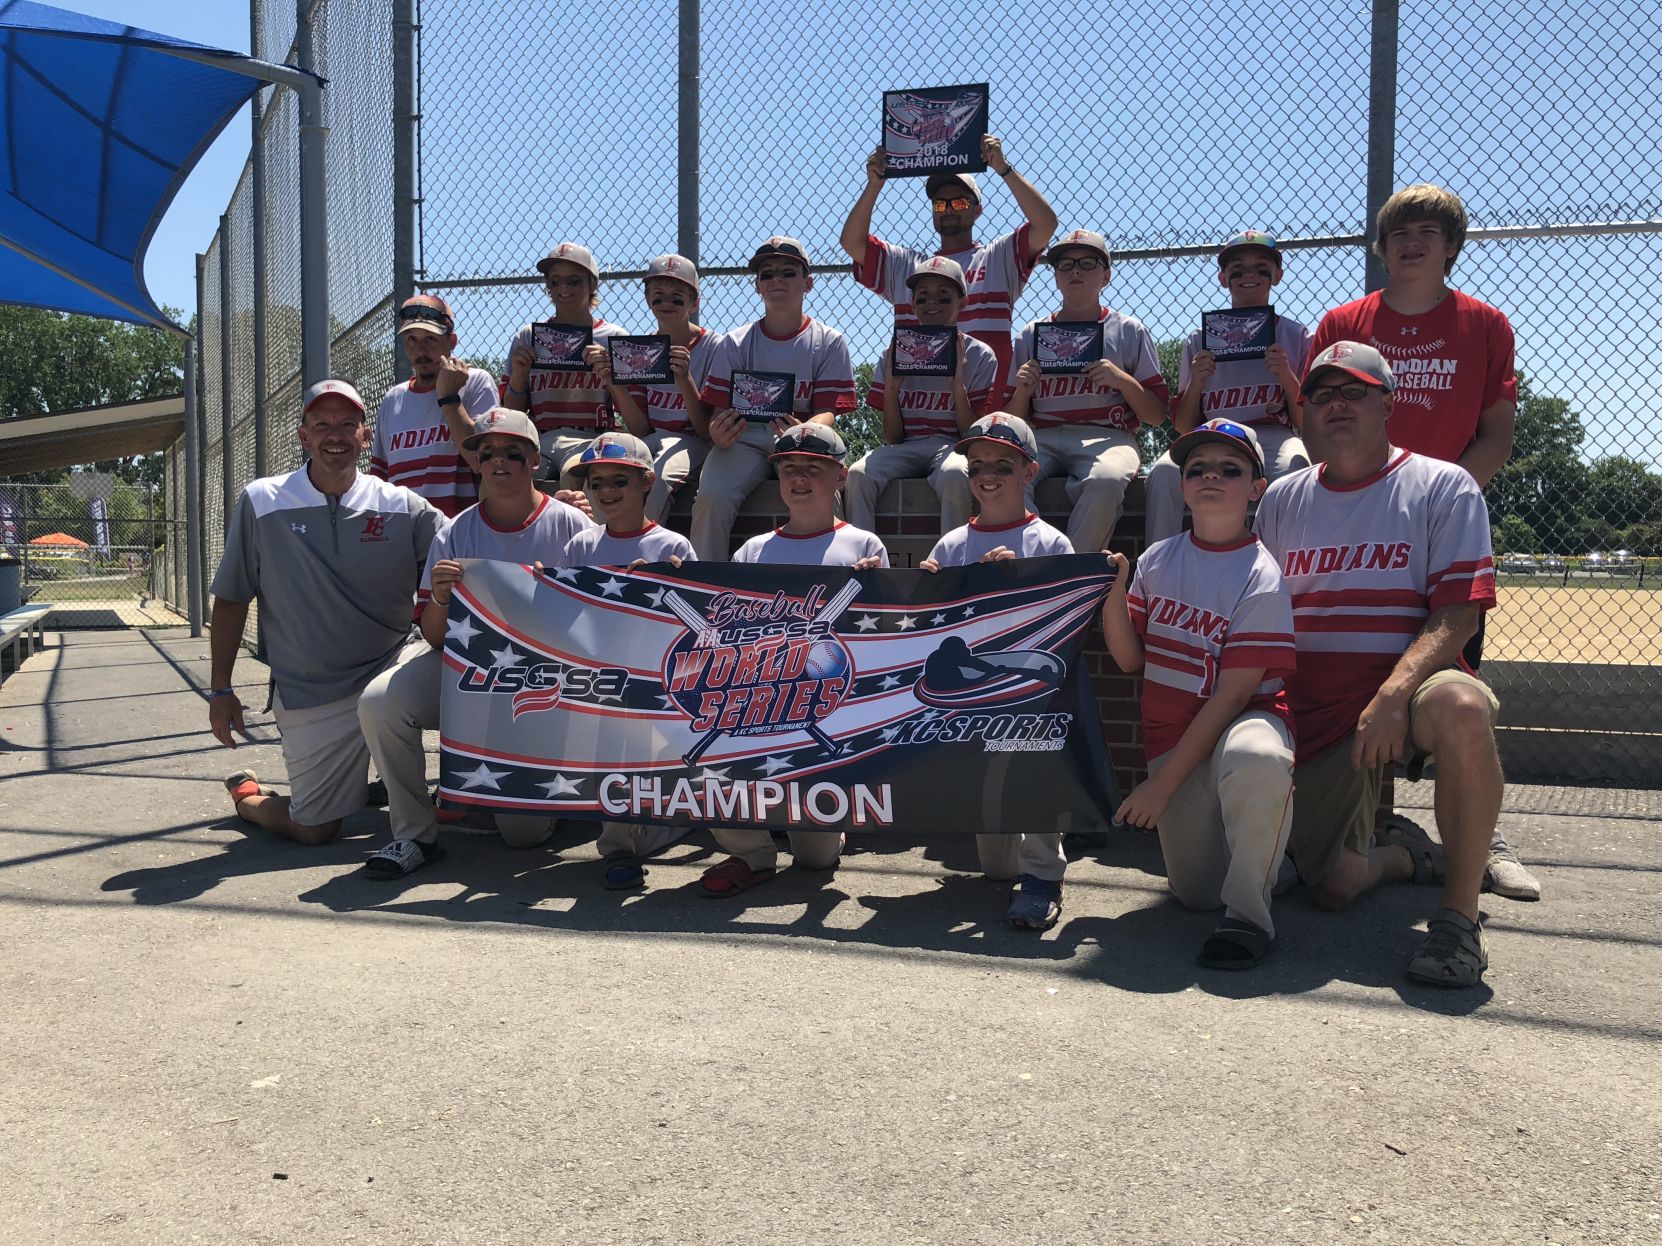 Youth baseball Forest City 12u team places in USSSA AA World Series